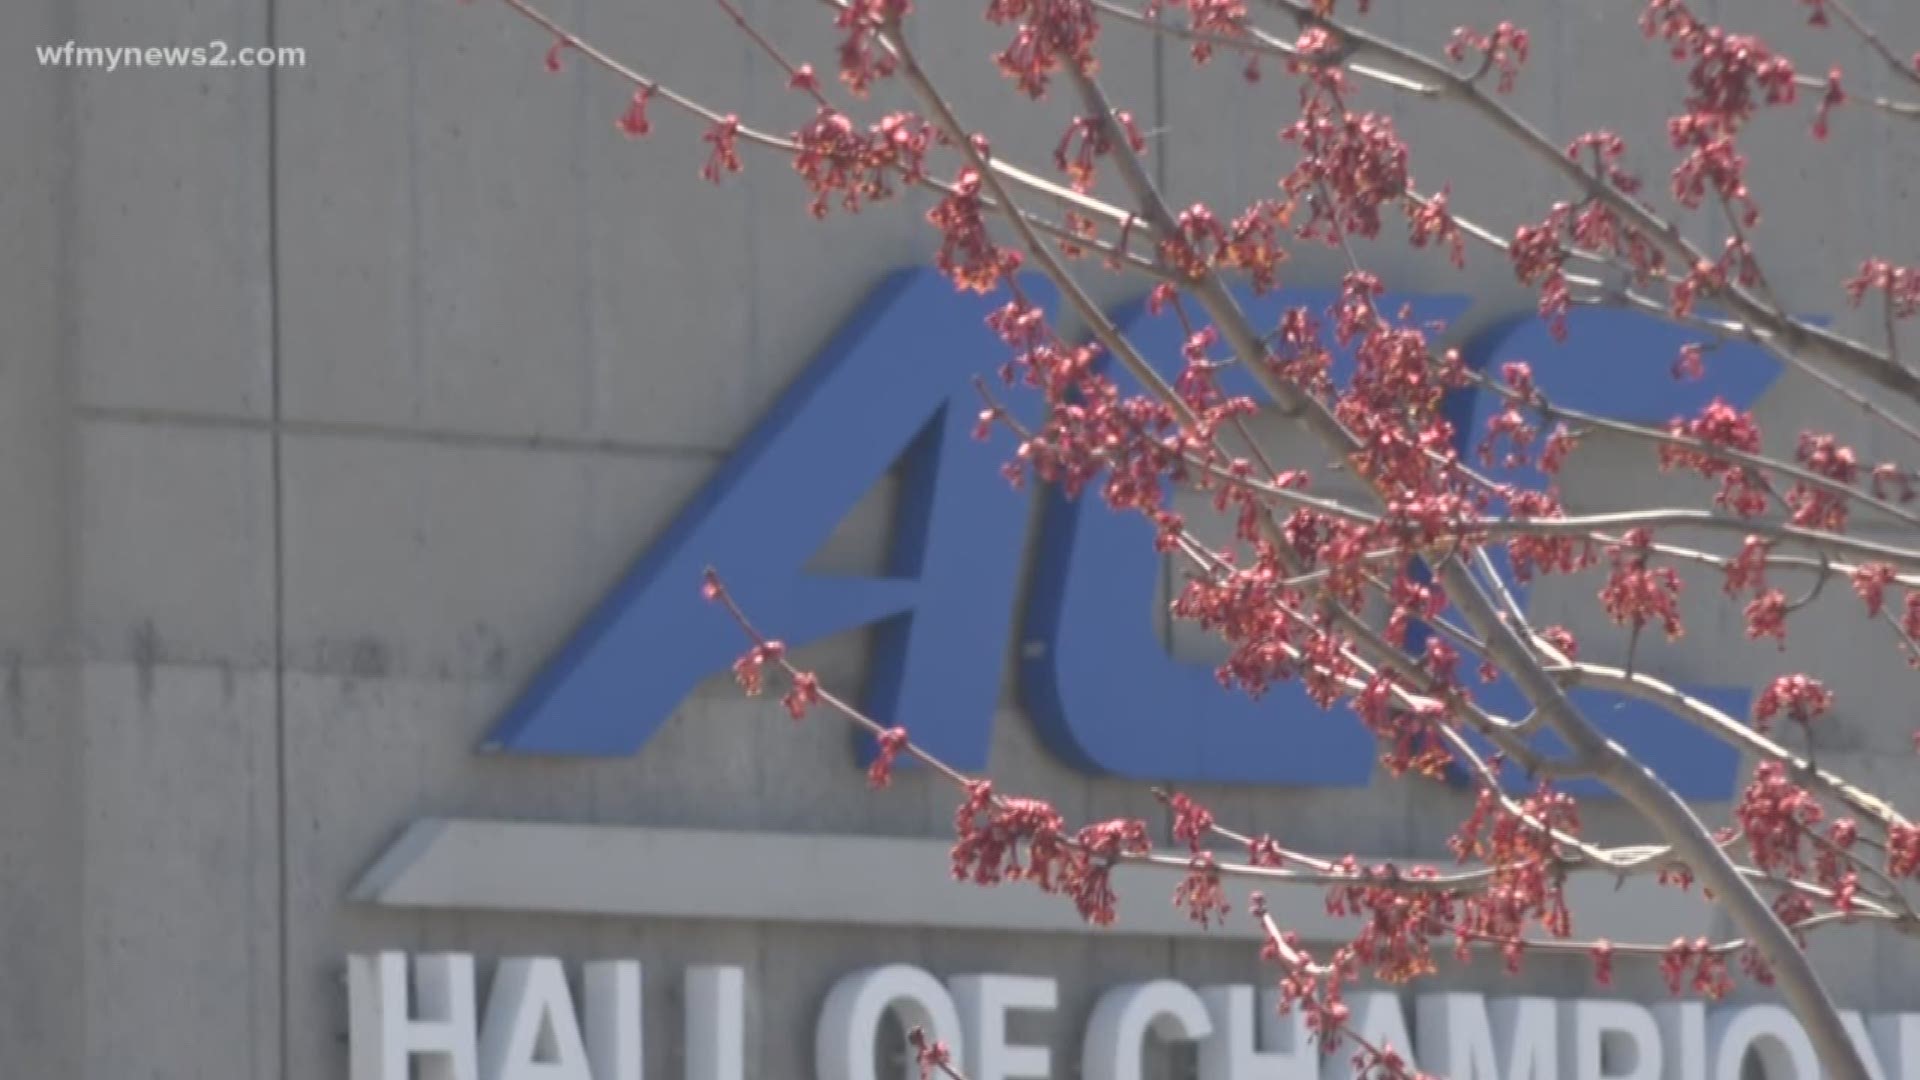 The ACC and NCAA tournaments were canceled Thursday. Colleges are moving to online learning. People are staying inside. It’s all having an impact on business owners.